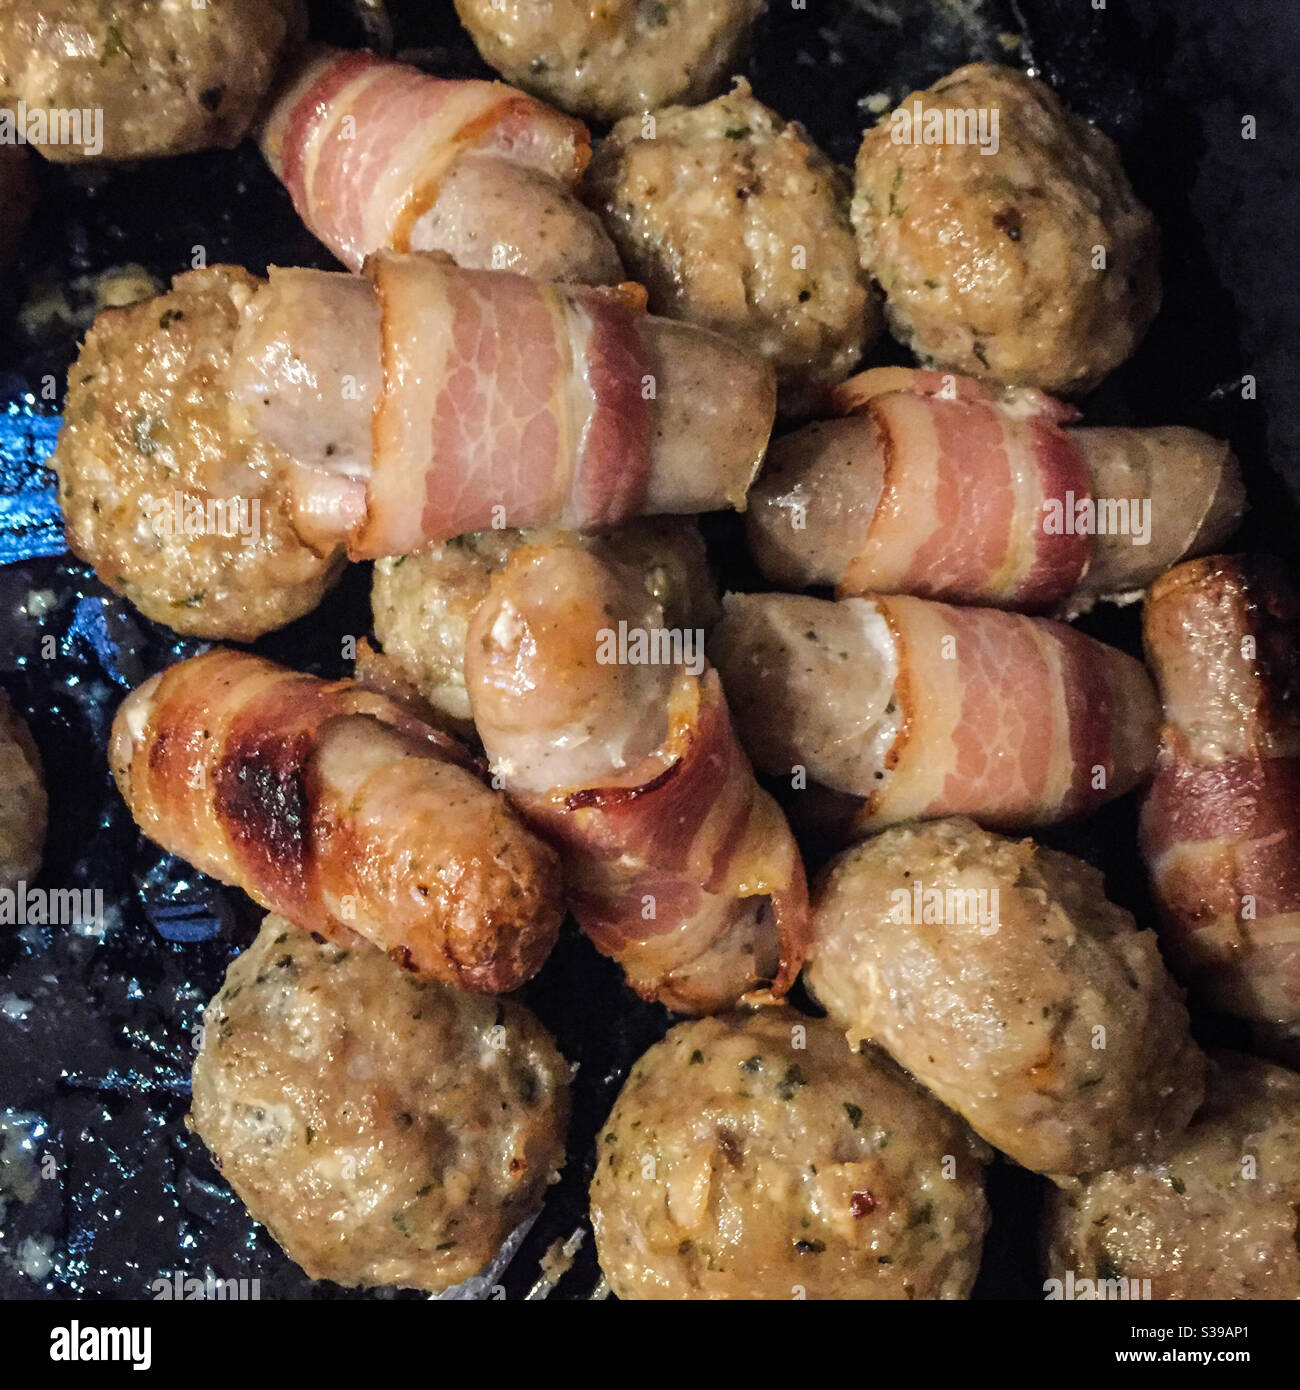 Pigs in blankets with stuffing Stock Photo